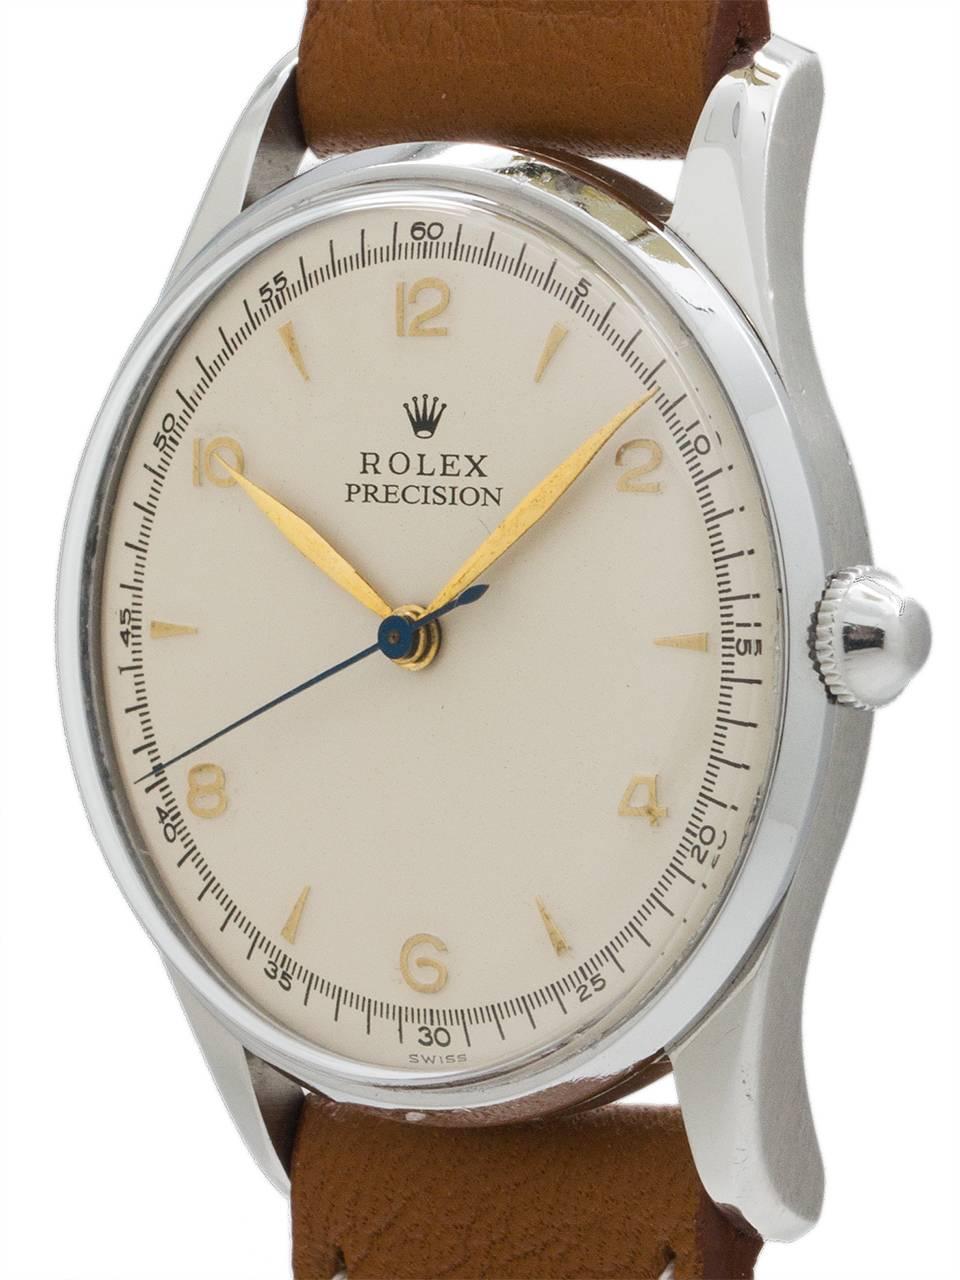 Aesthetic Movement Rolex Stainless Steel Dress Model manual wind wristwatch Ref 5517, circa 1950s